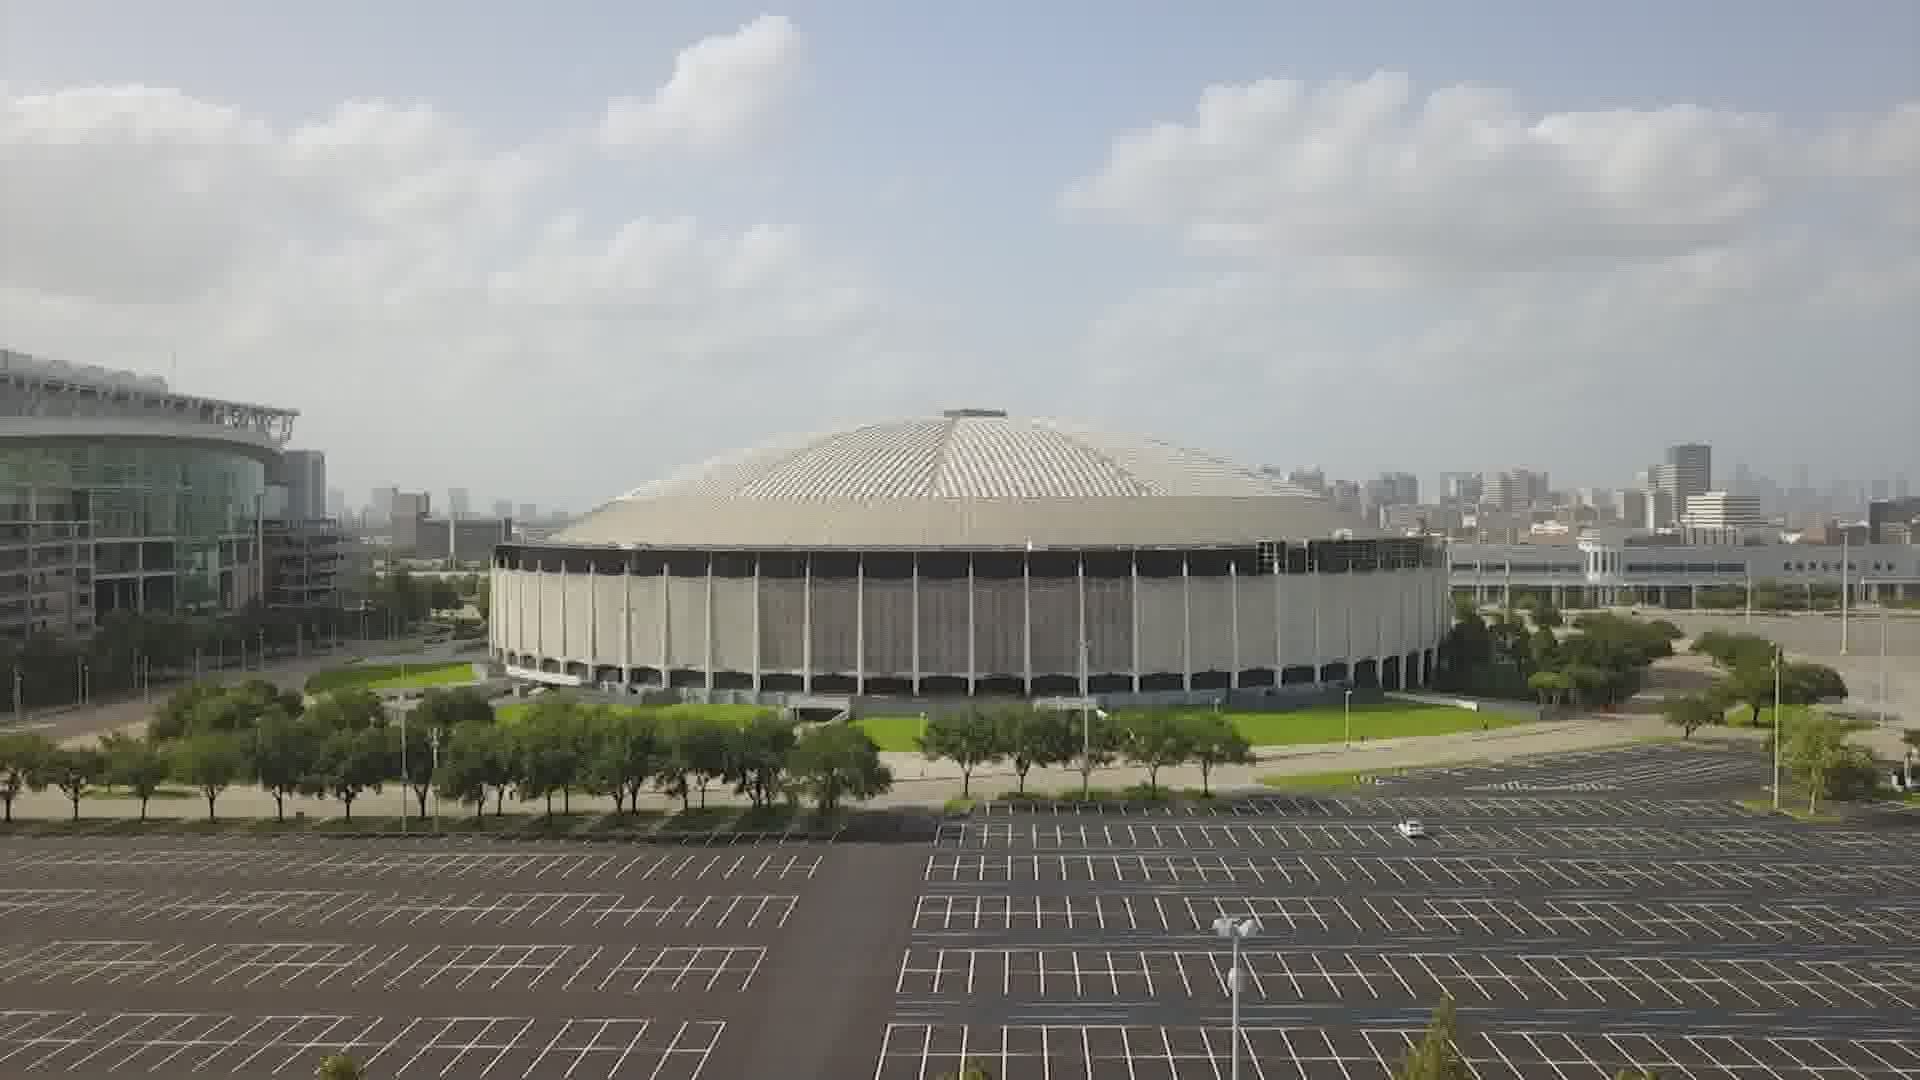 The Astrodome Conservancy has been pushing for ways to reuse the space. This time it wants to hear from you.